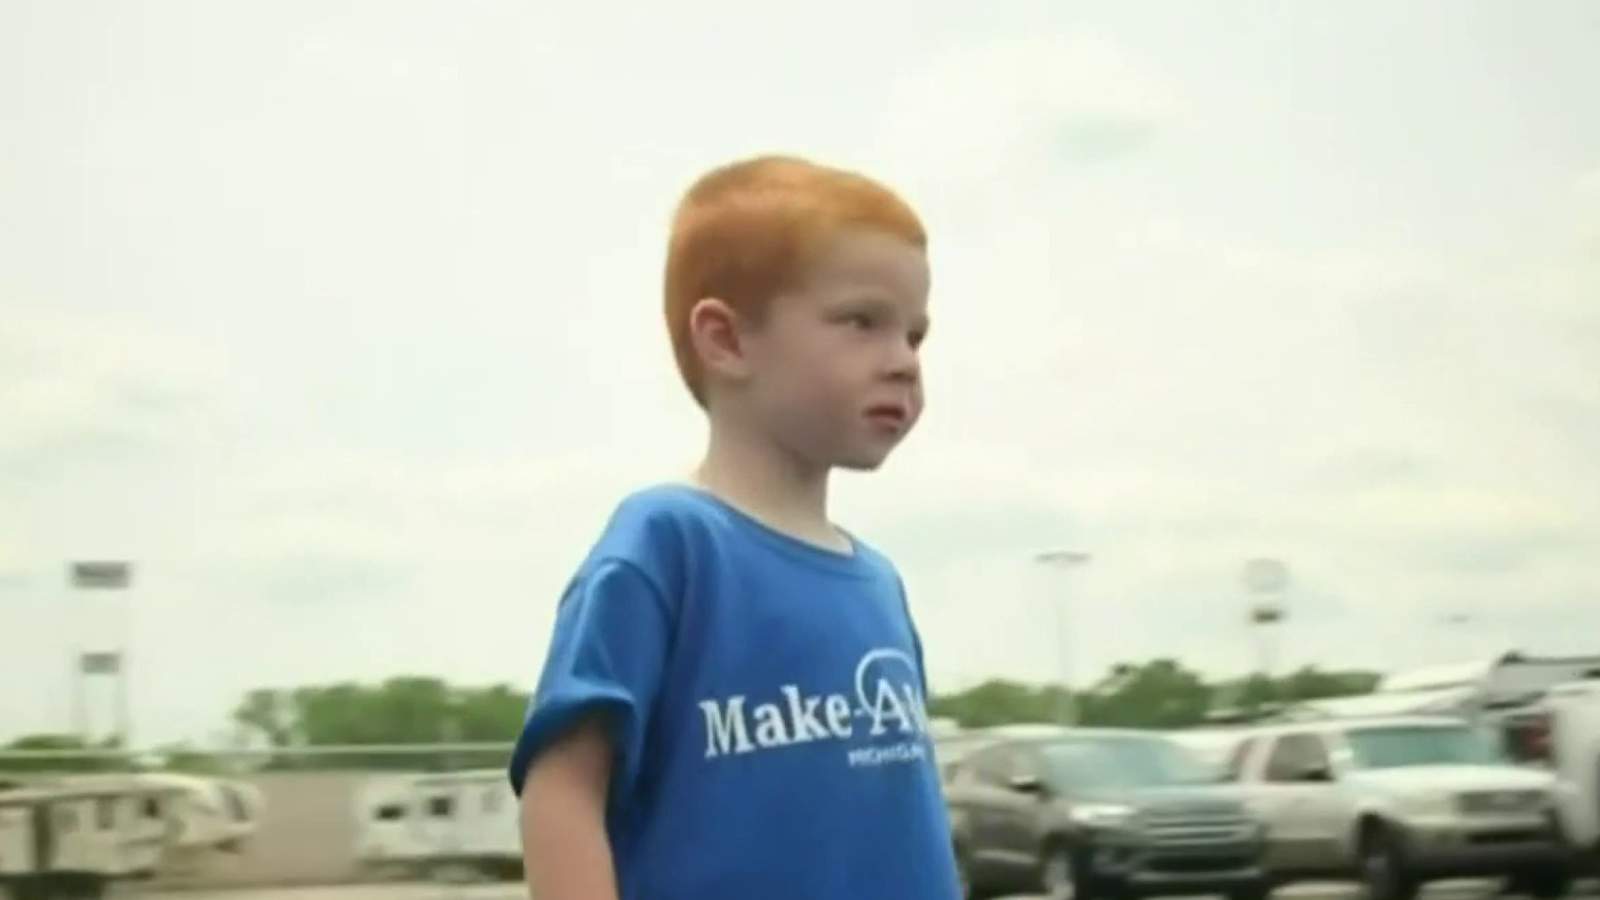 Macomb boys wish for camper granted through Make-A-Wish Foundation